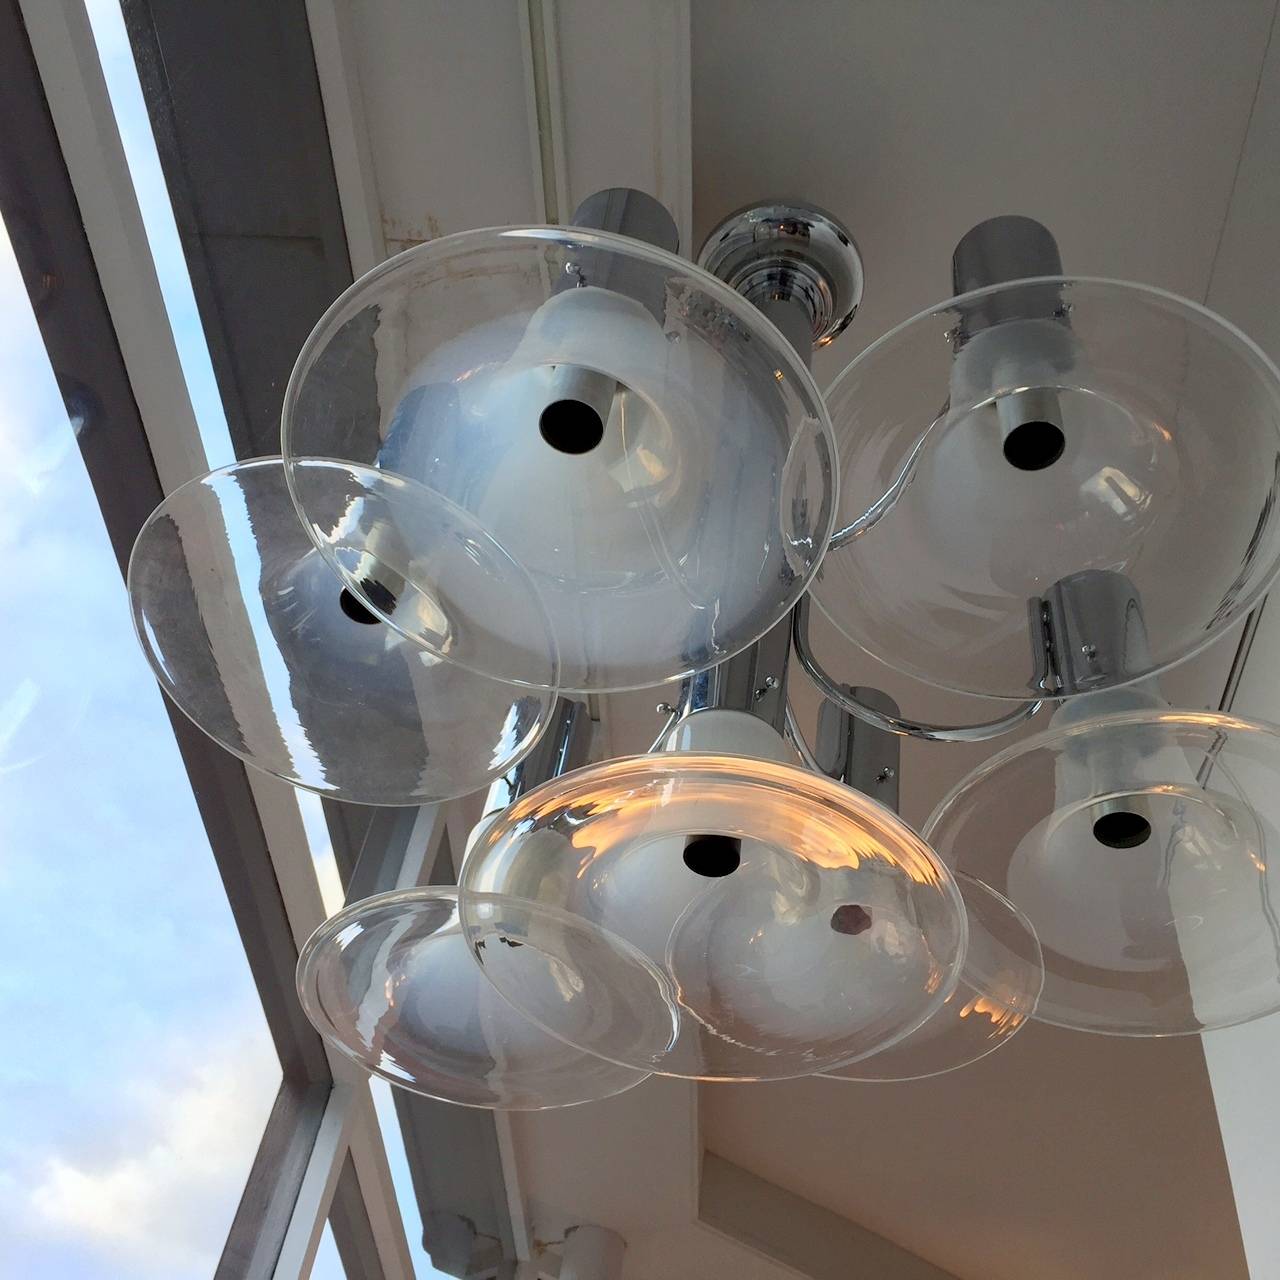 Amazing seven glasses ceiling lights. Chromed structure and large stylized blown glasses shades.